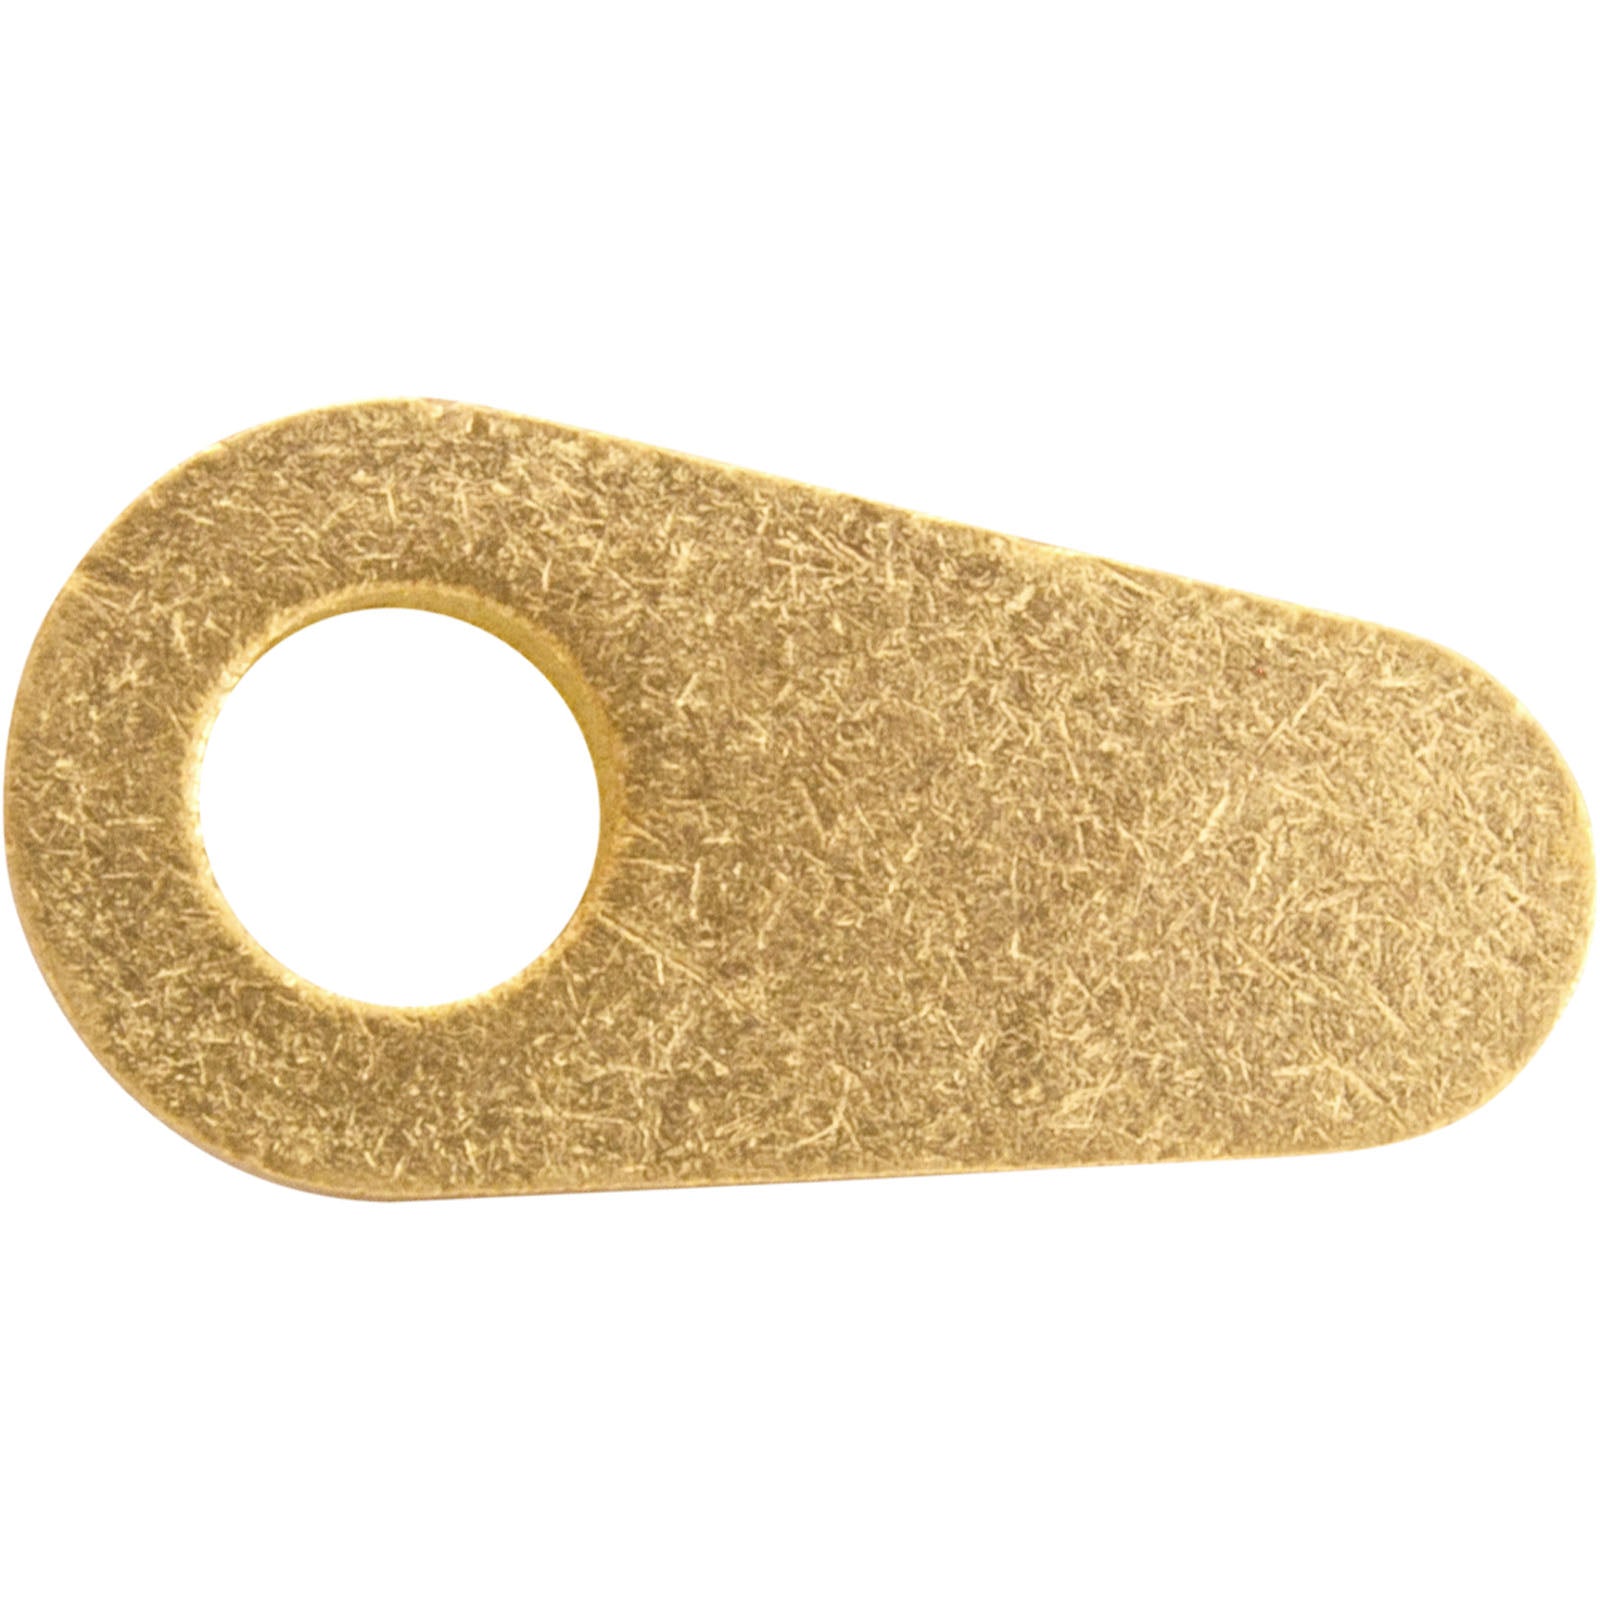 Light Retainer Clip, American Products, Amerlite, Brass 79105100